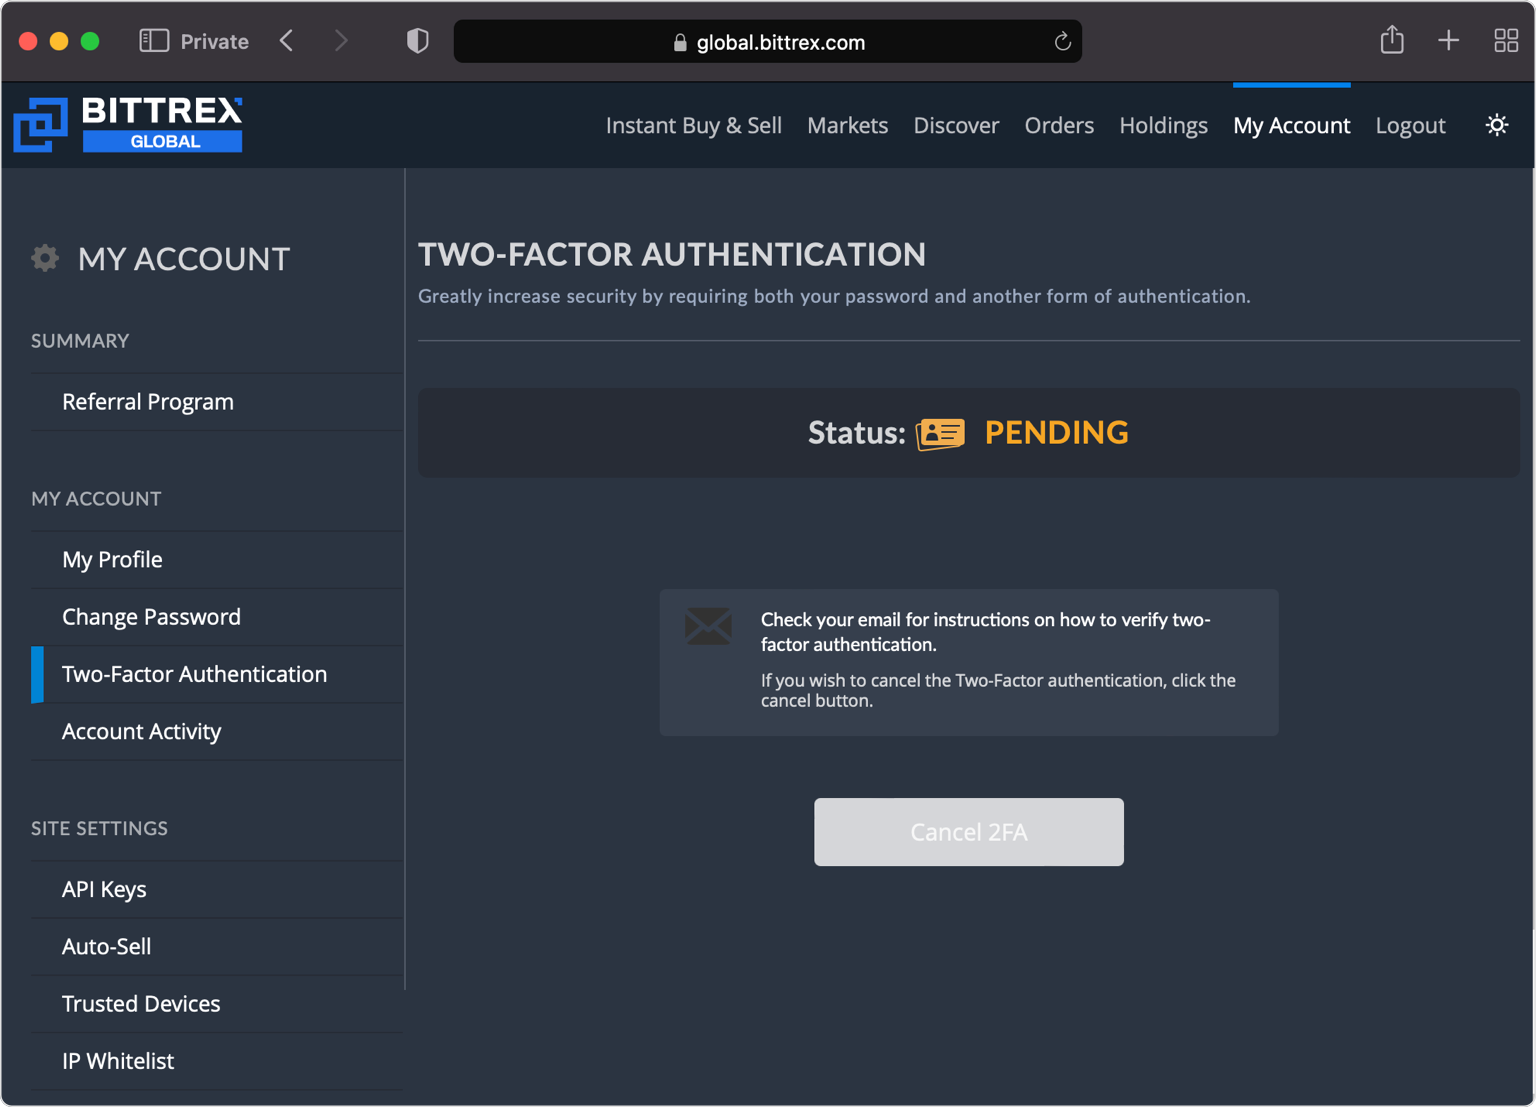 Activate Two-Factor Authentication